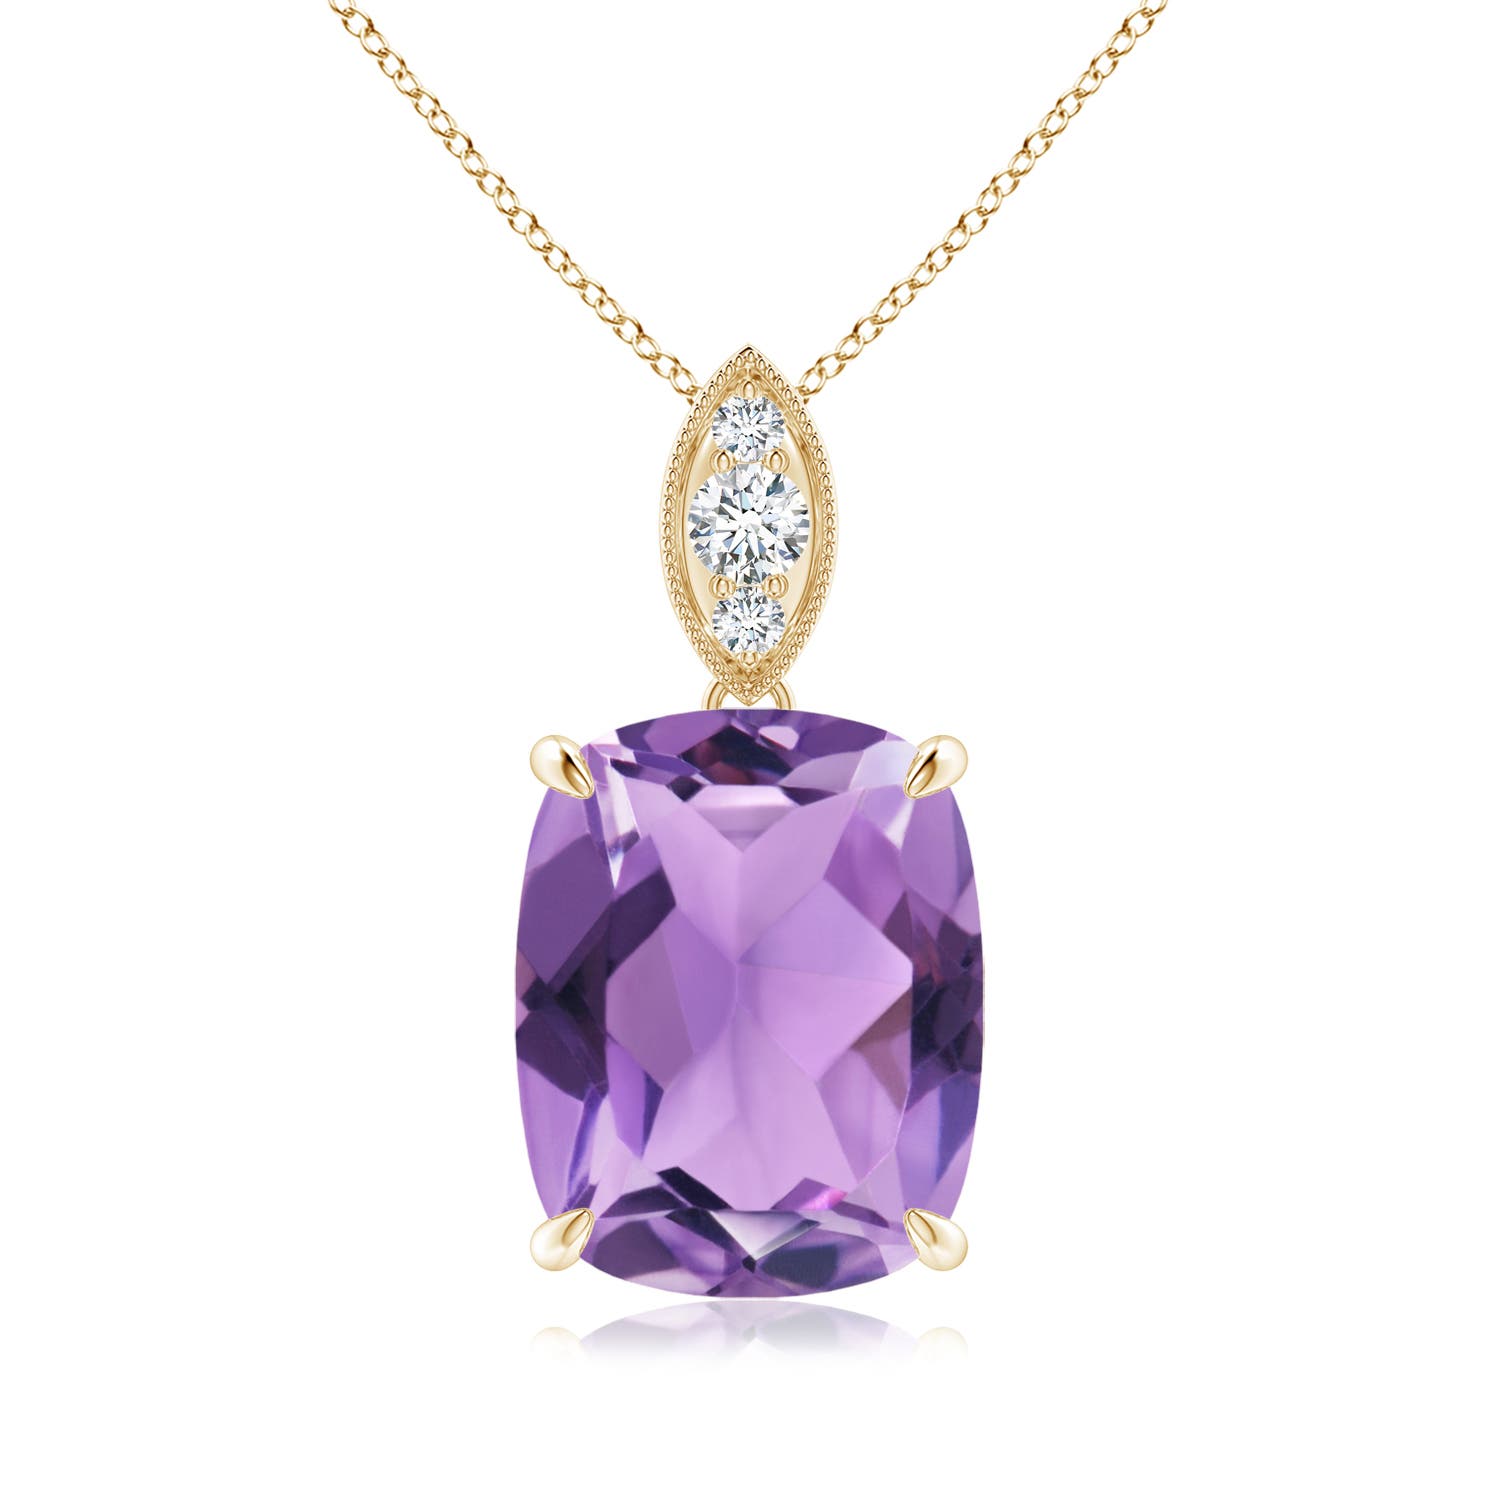 A - Amethyst / 3.57 CT / 14 KT Yellow Gold